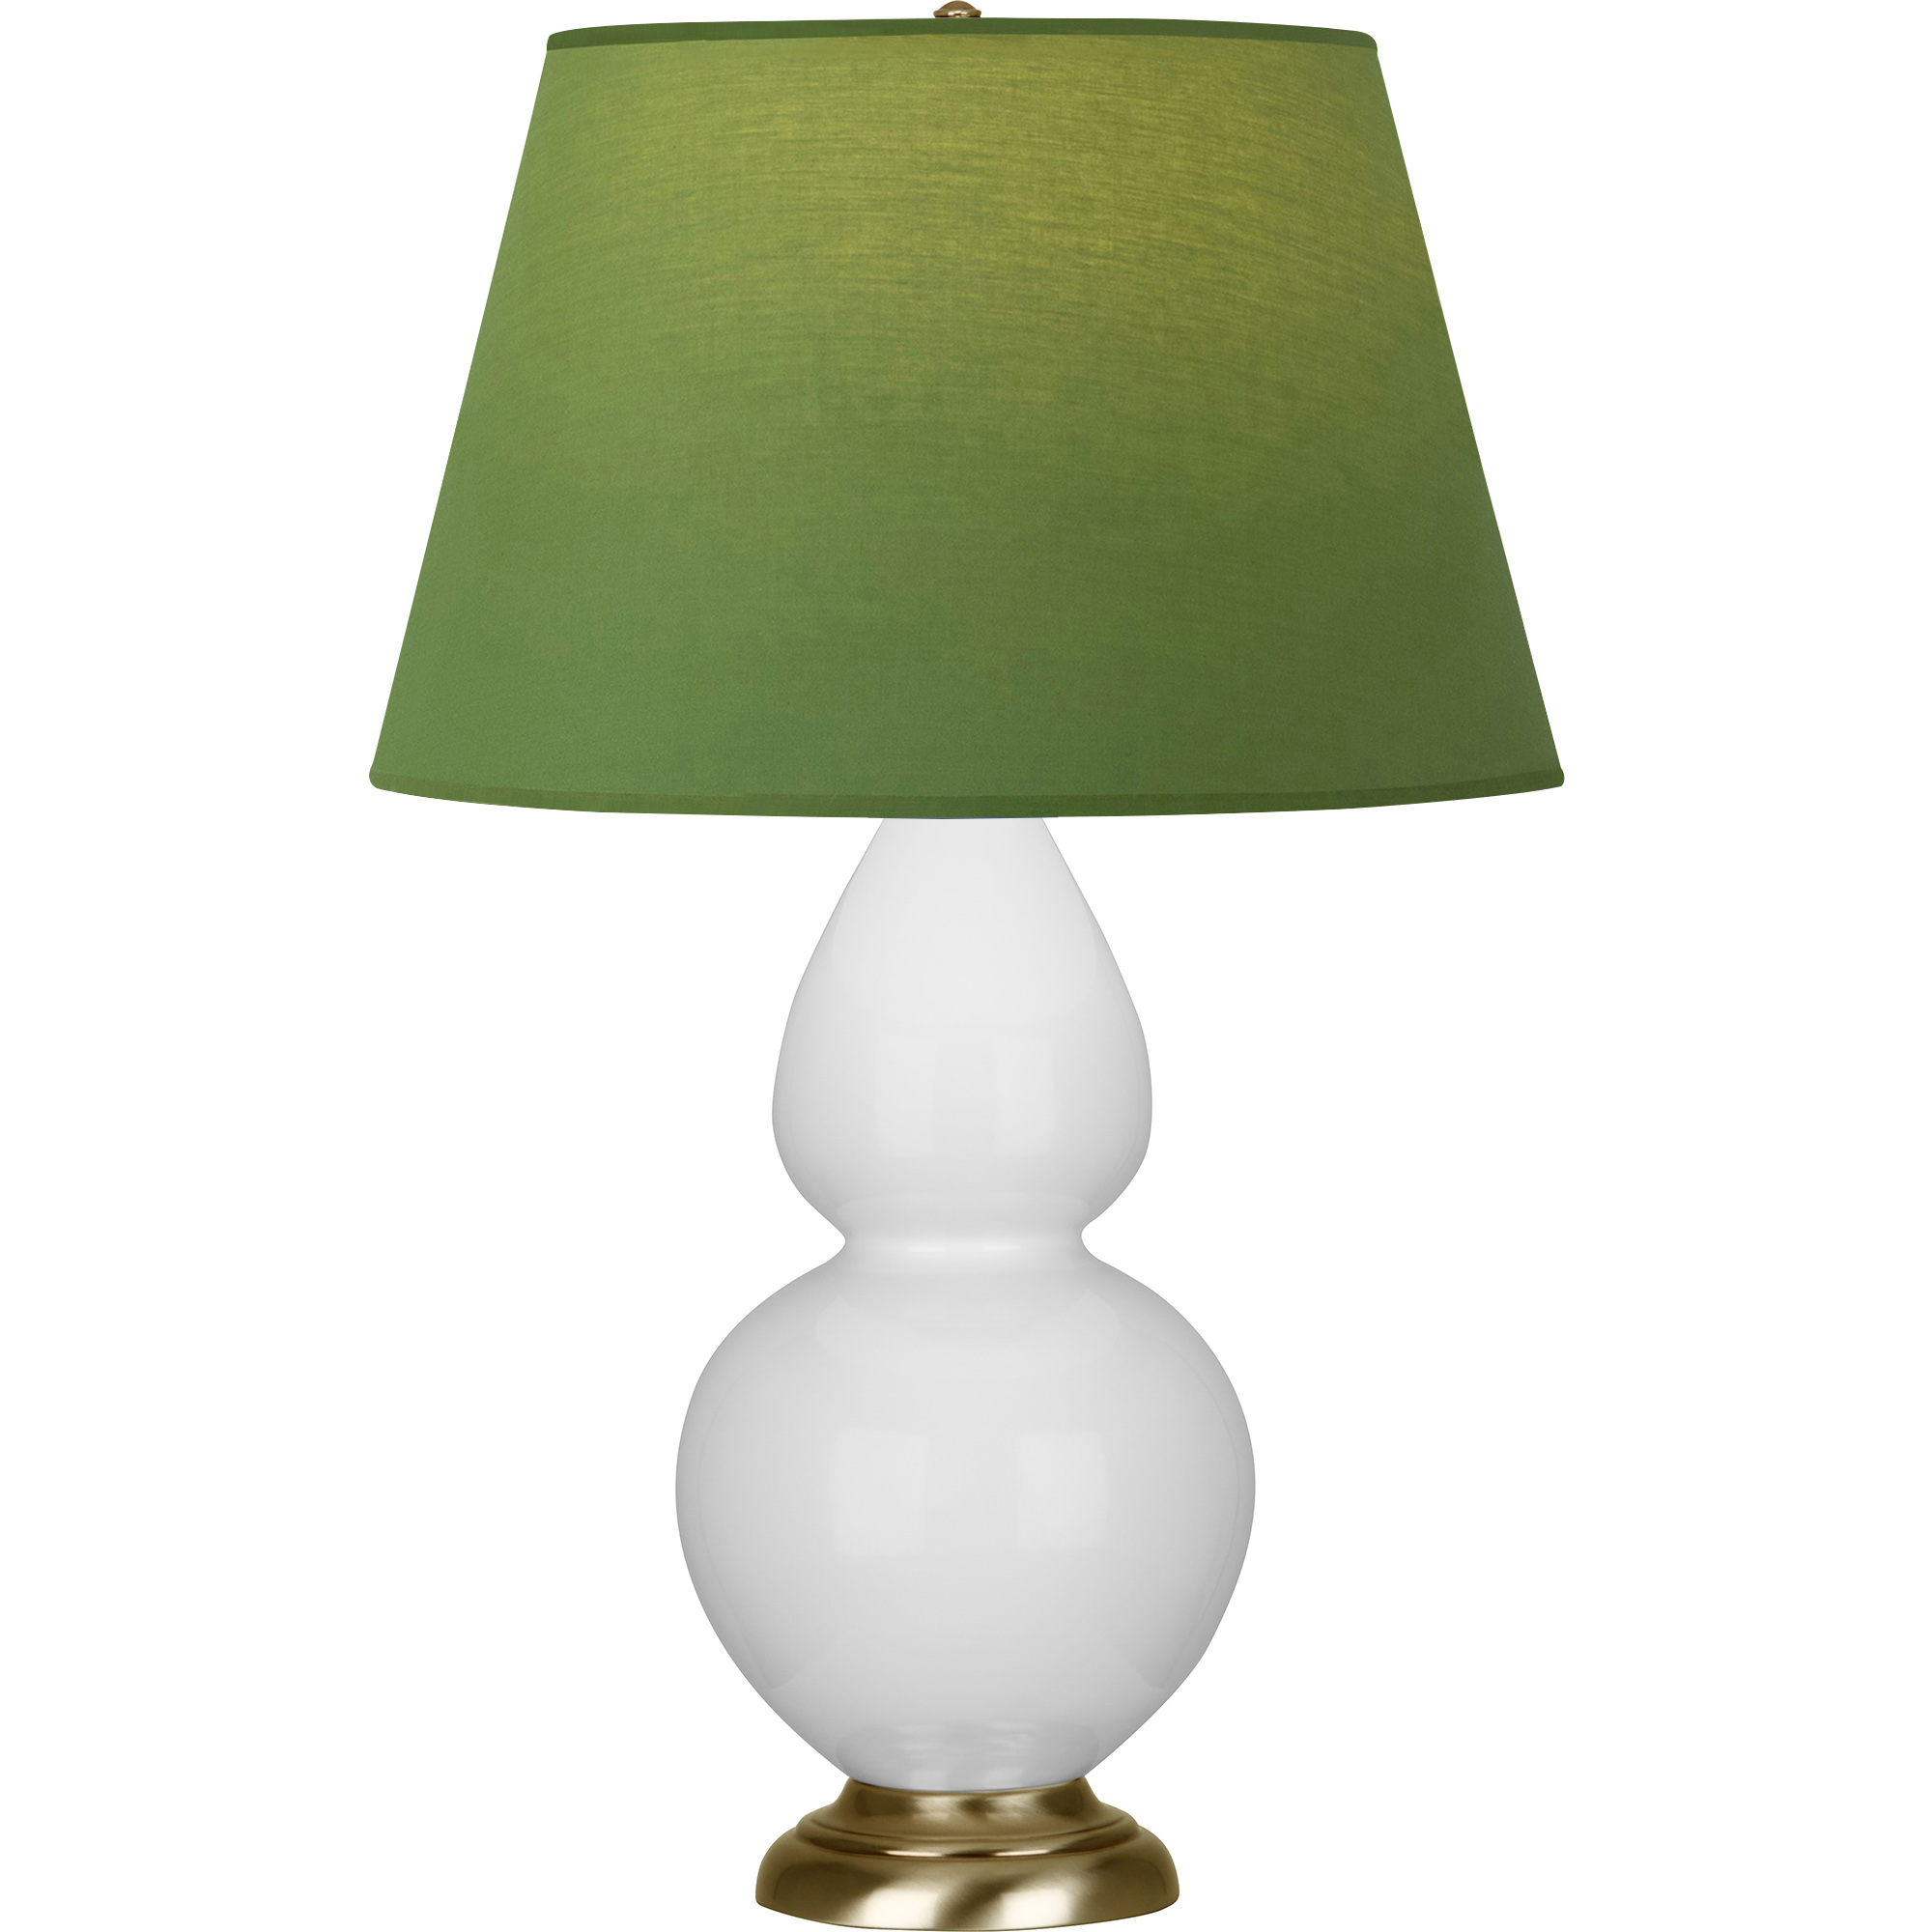 Double Gourd Table Lamp Style #DY20G